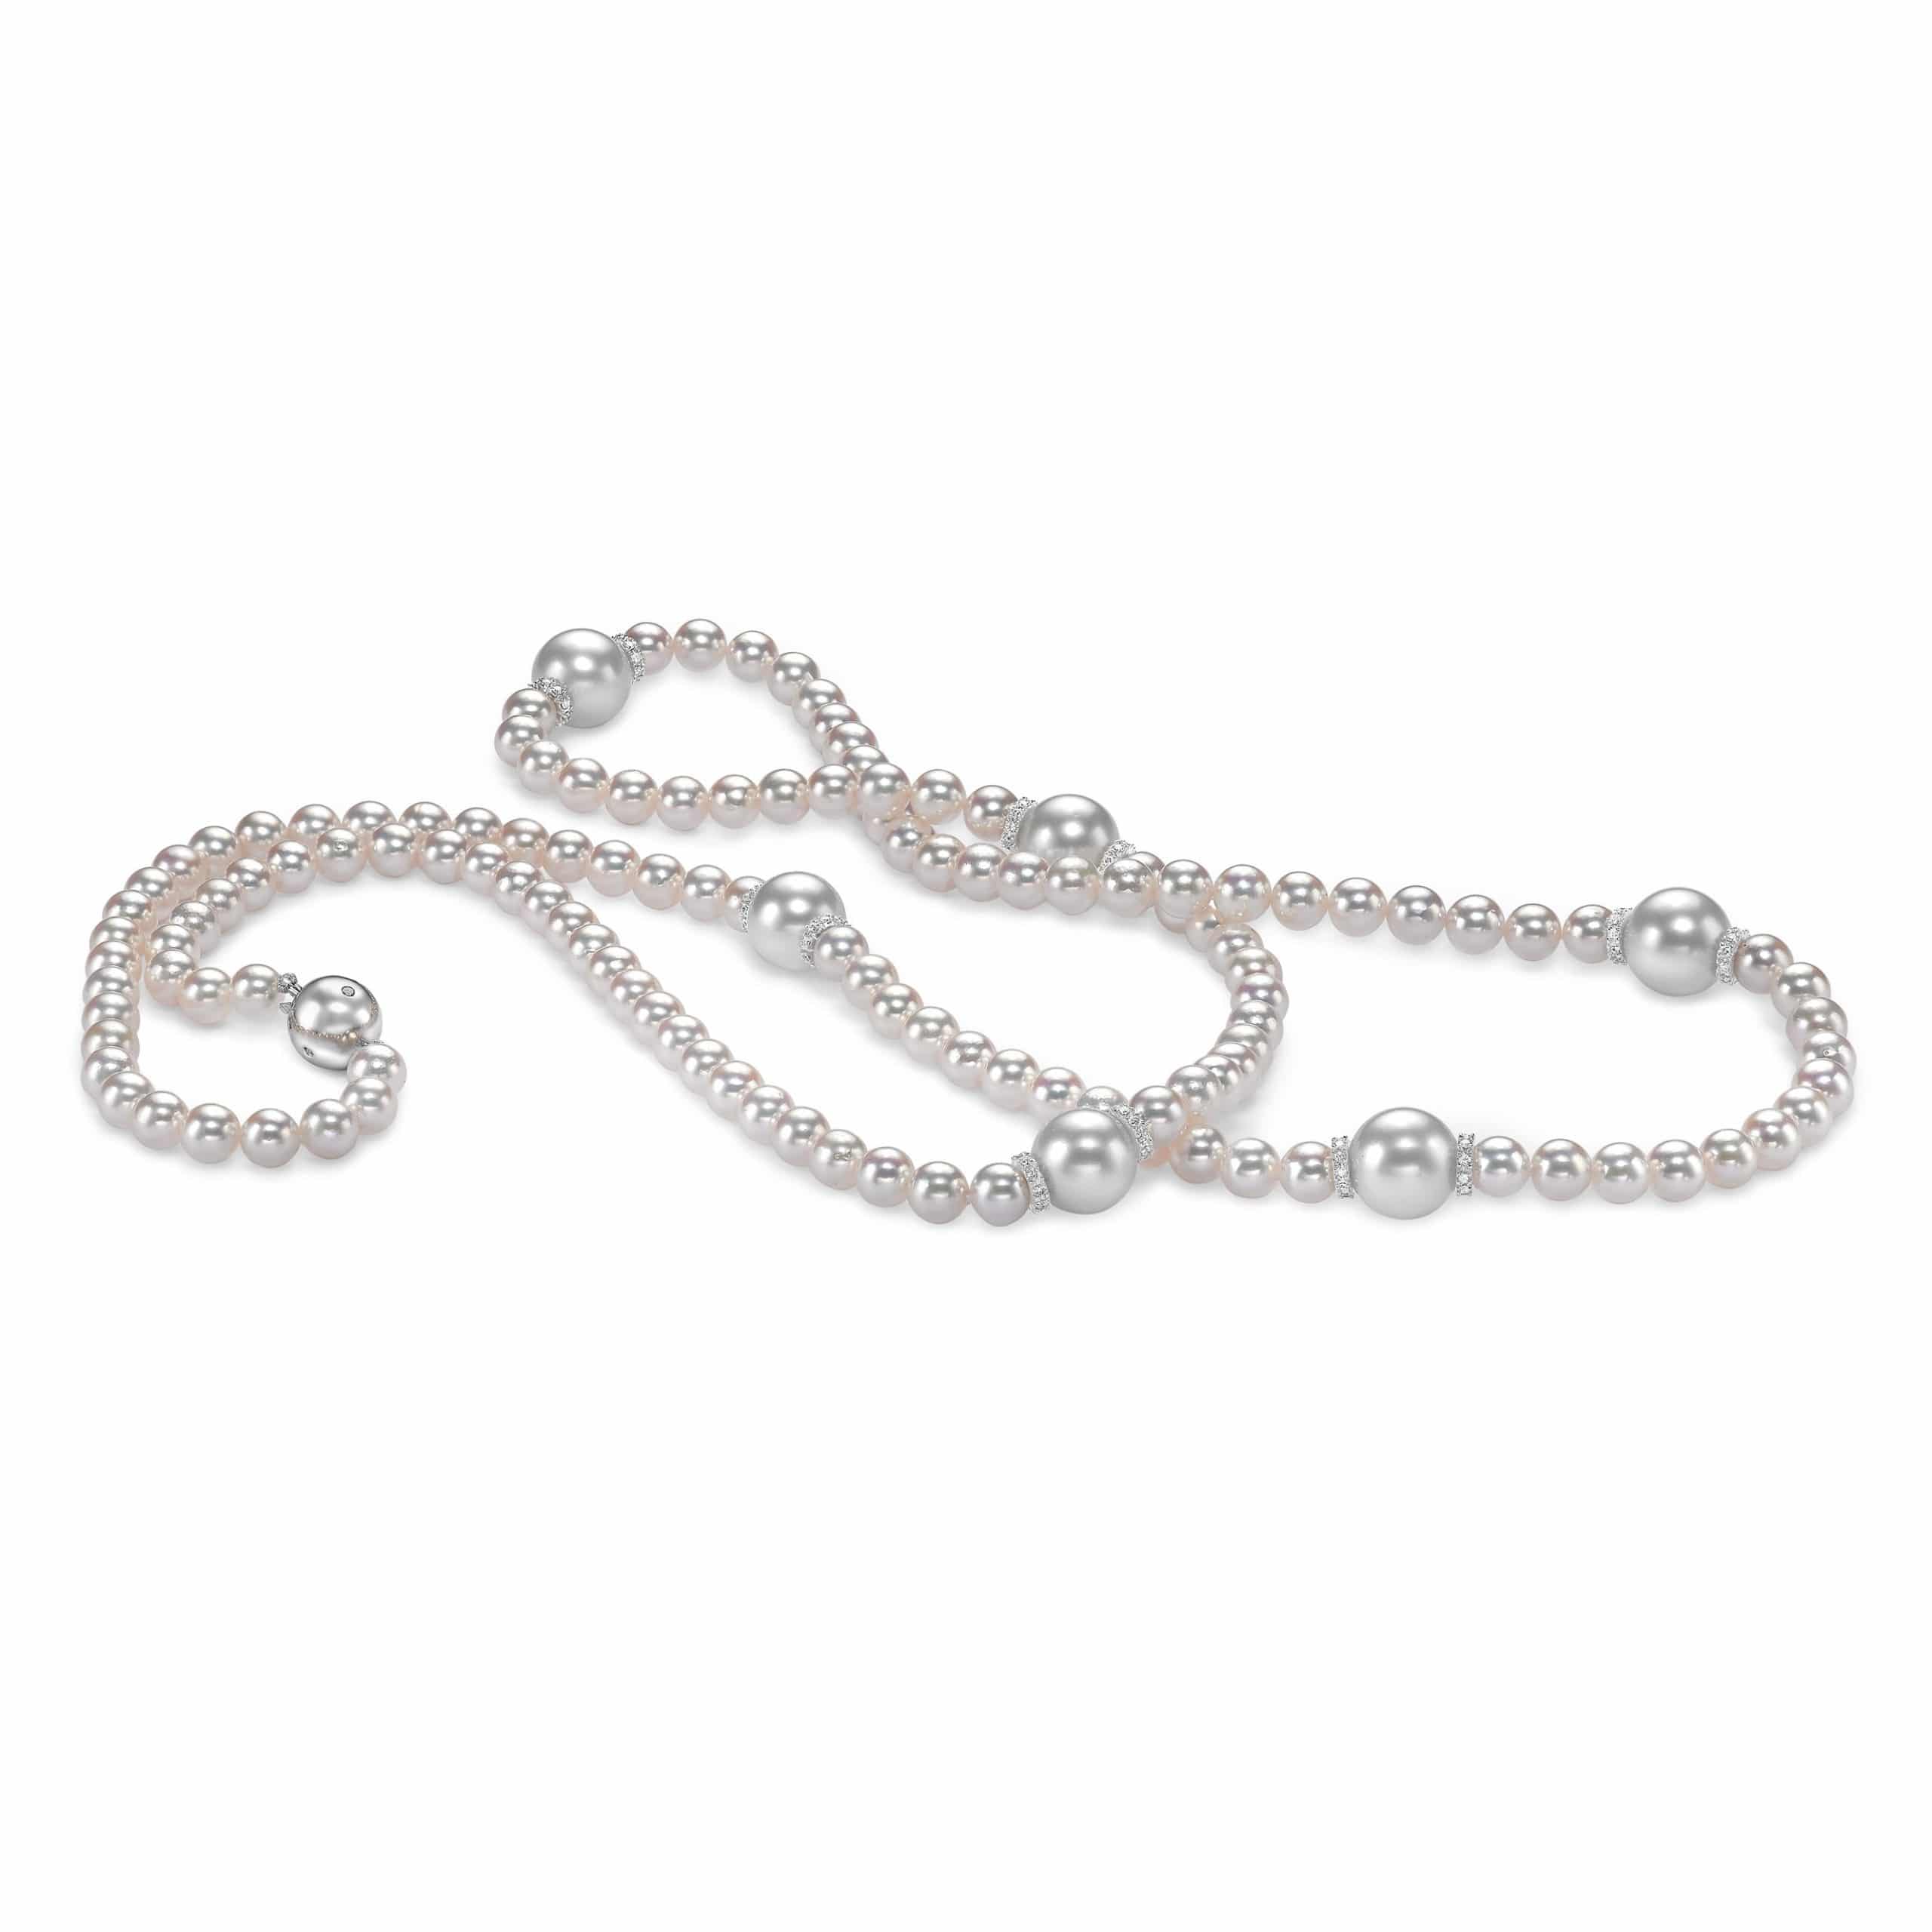 Akoya & South Sea Pearl Necklace, 1.15cts